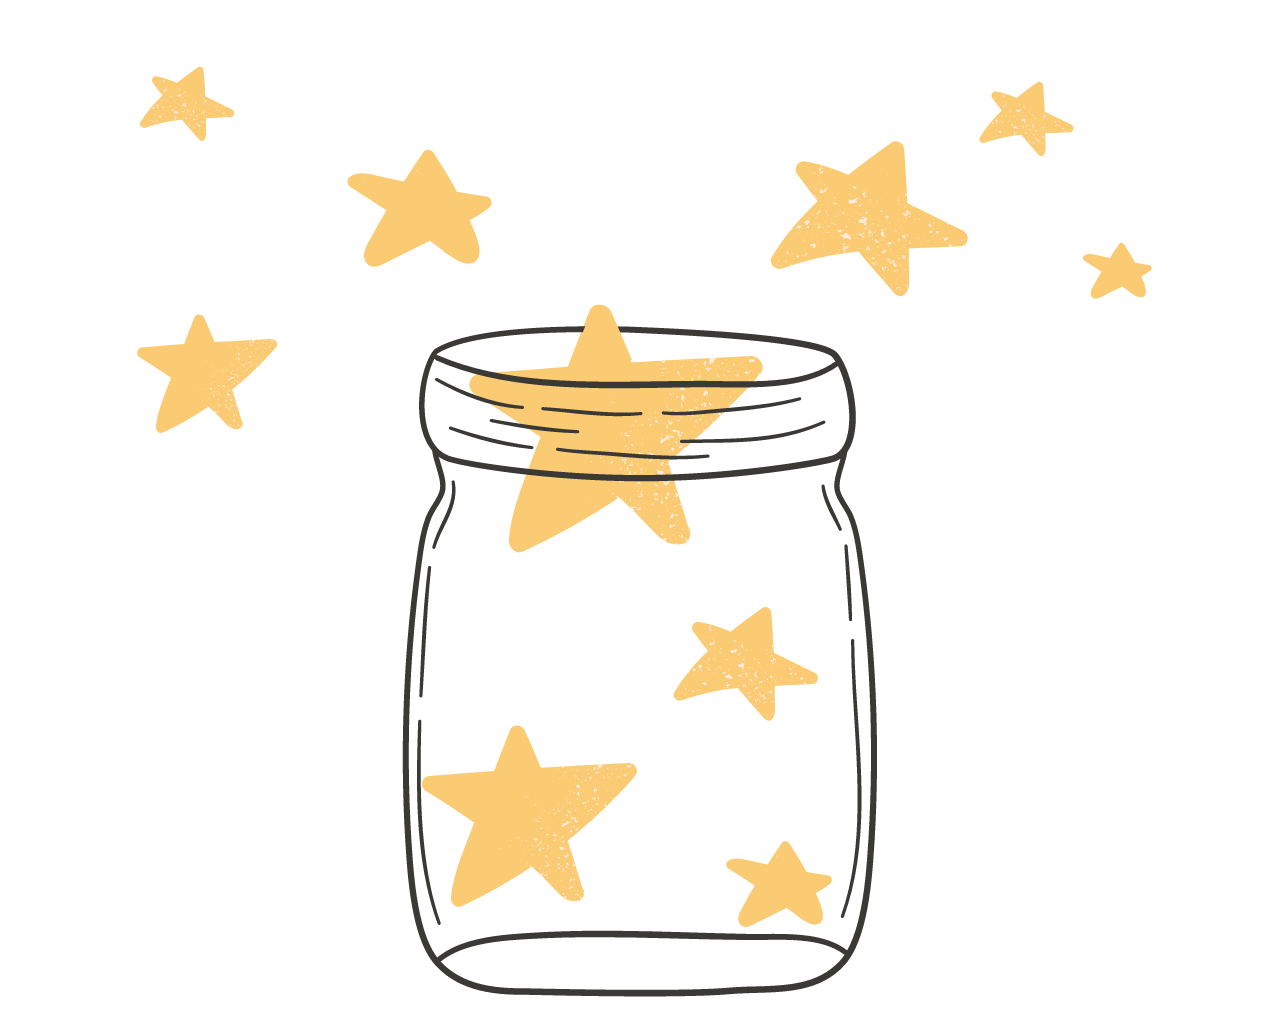 Little Star Savings Account - A jar filled with stars, topped by a shining star